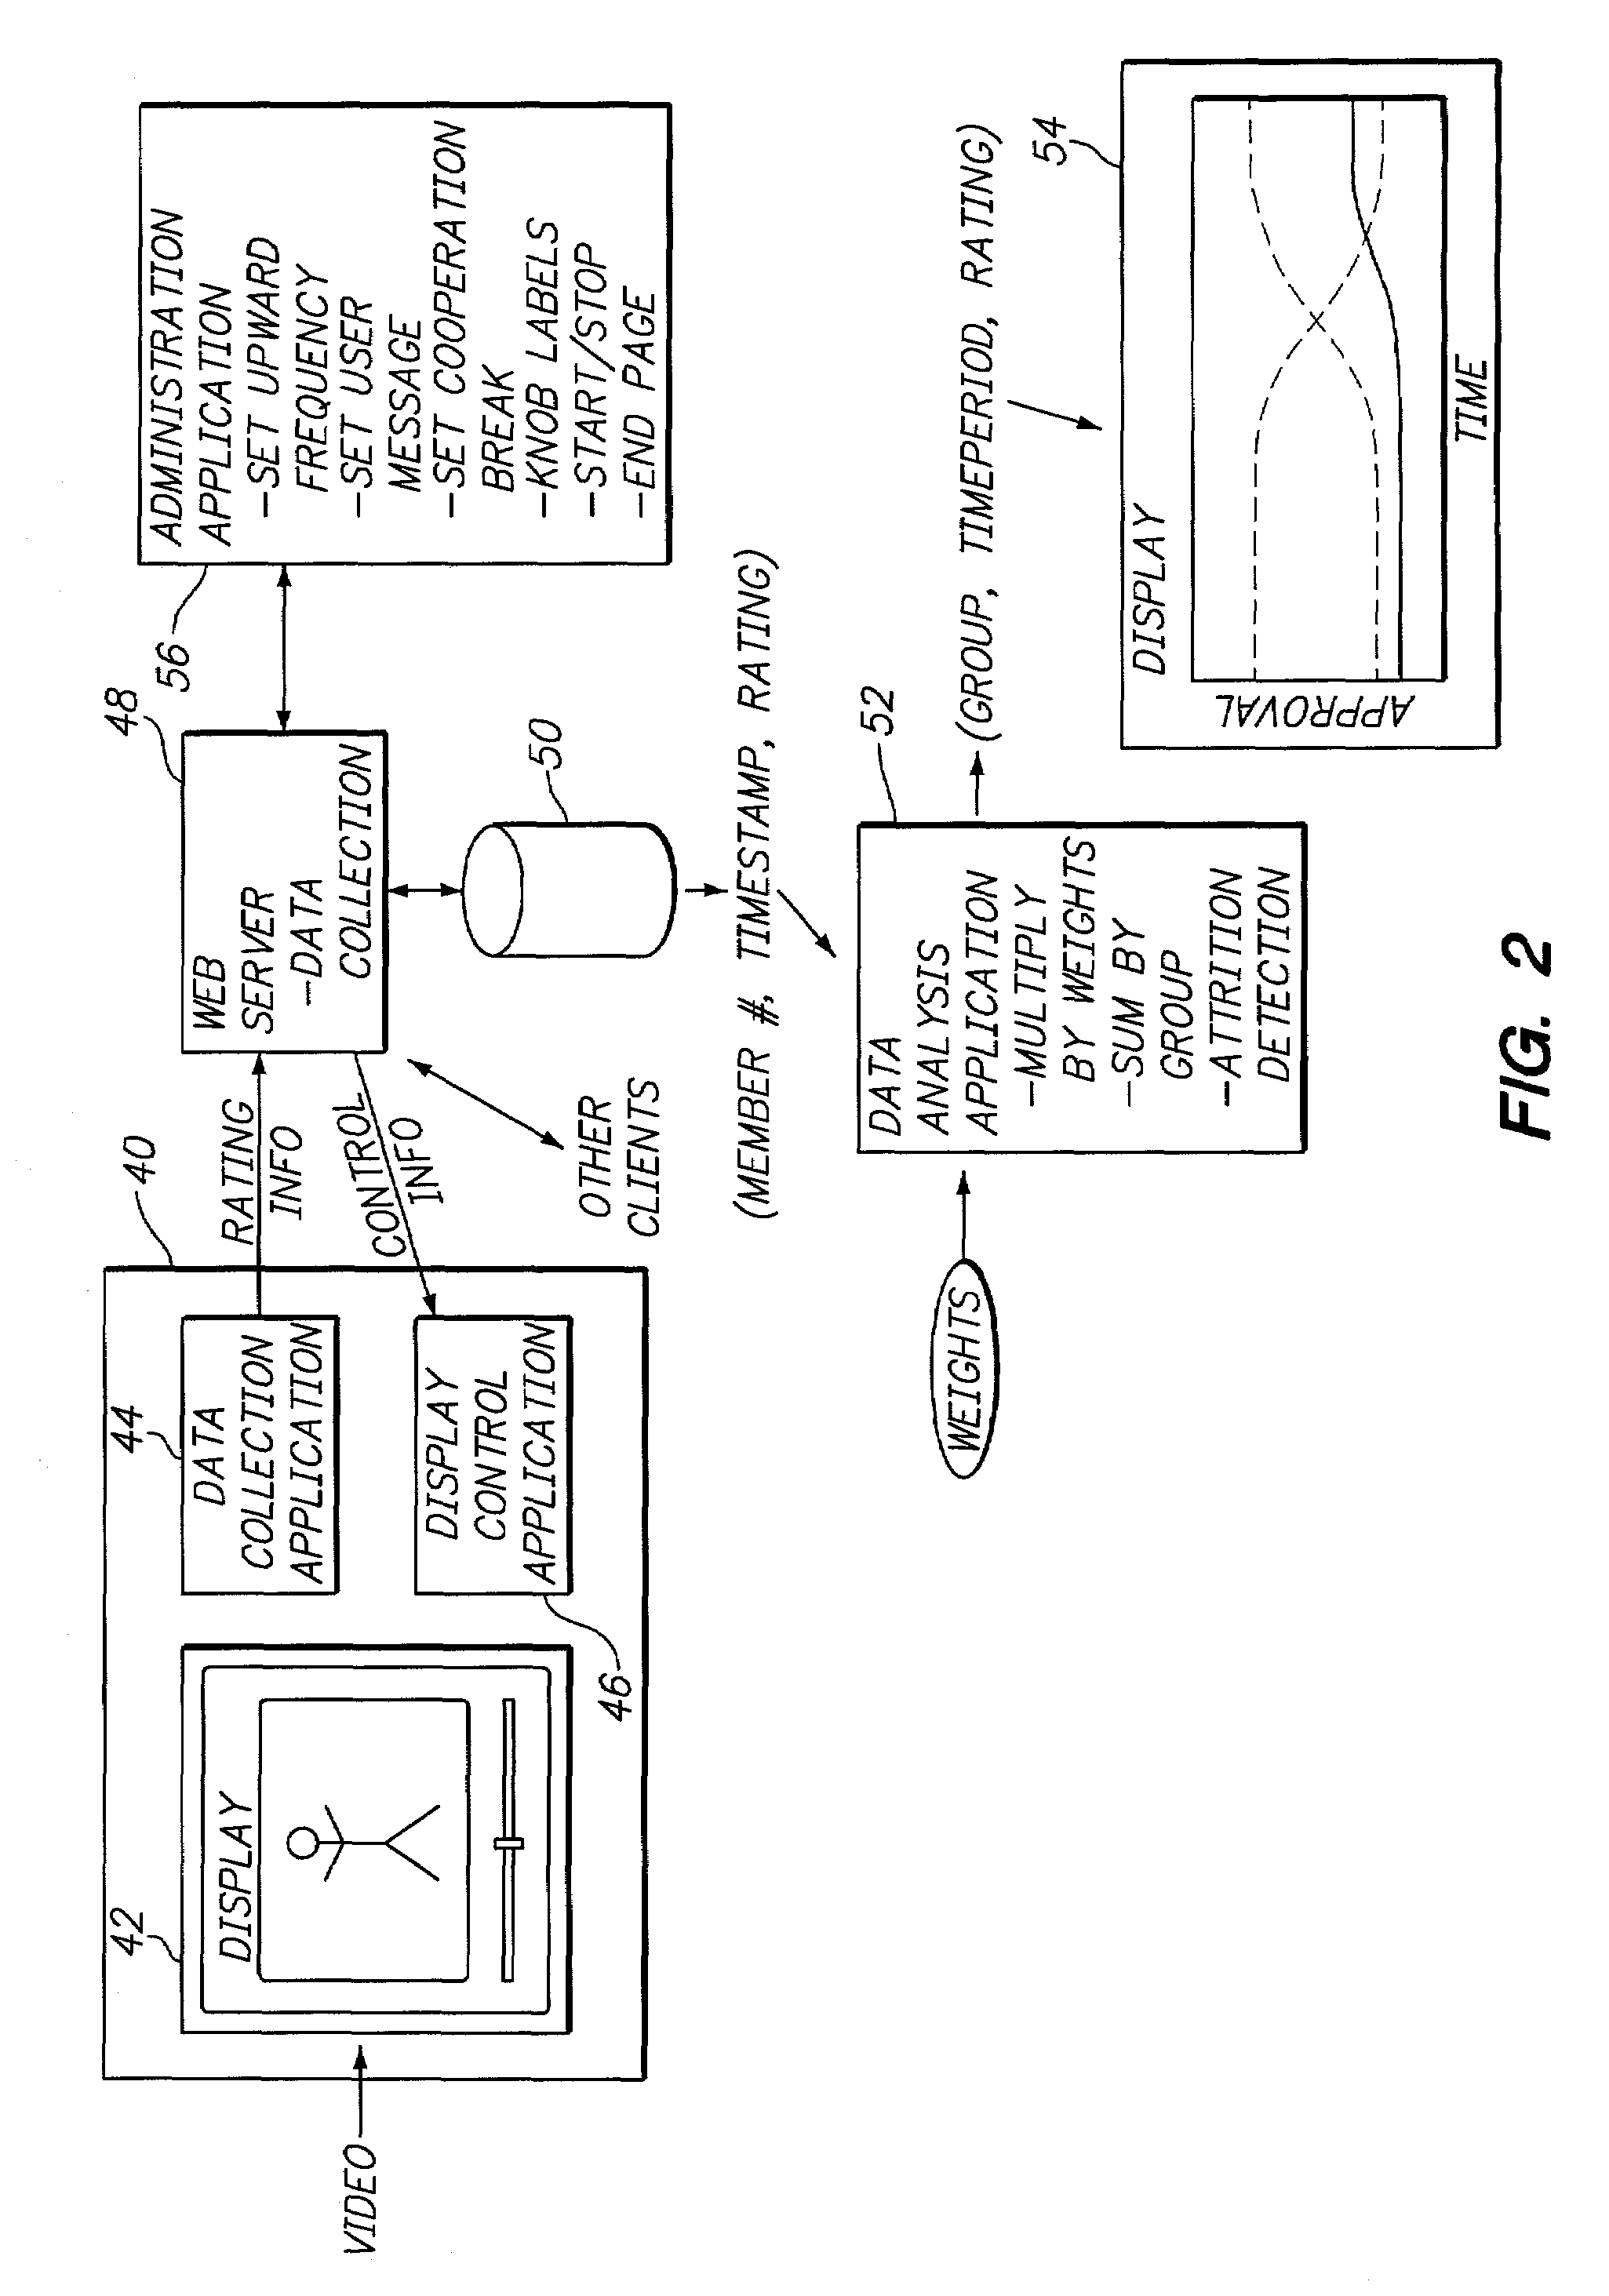 System and method for rating media information